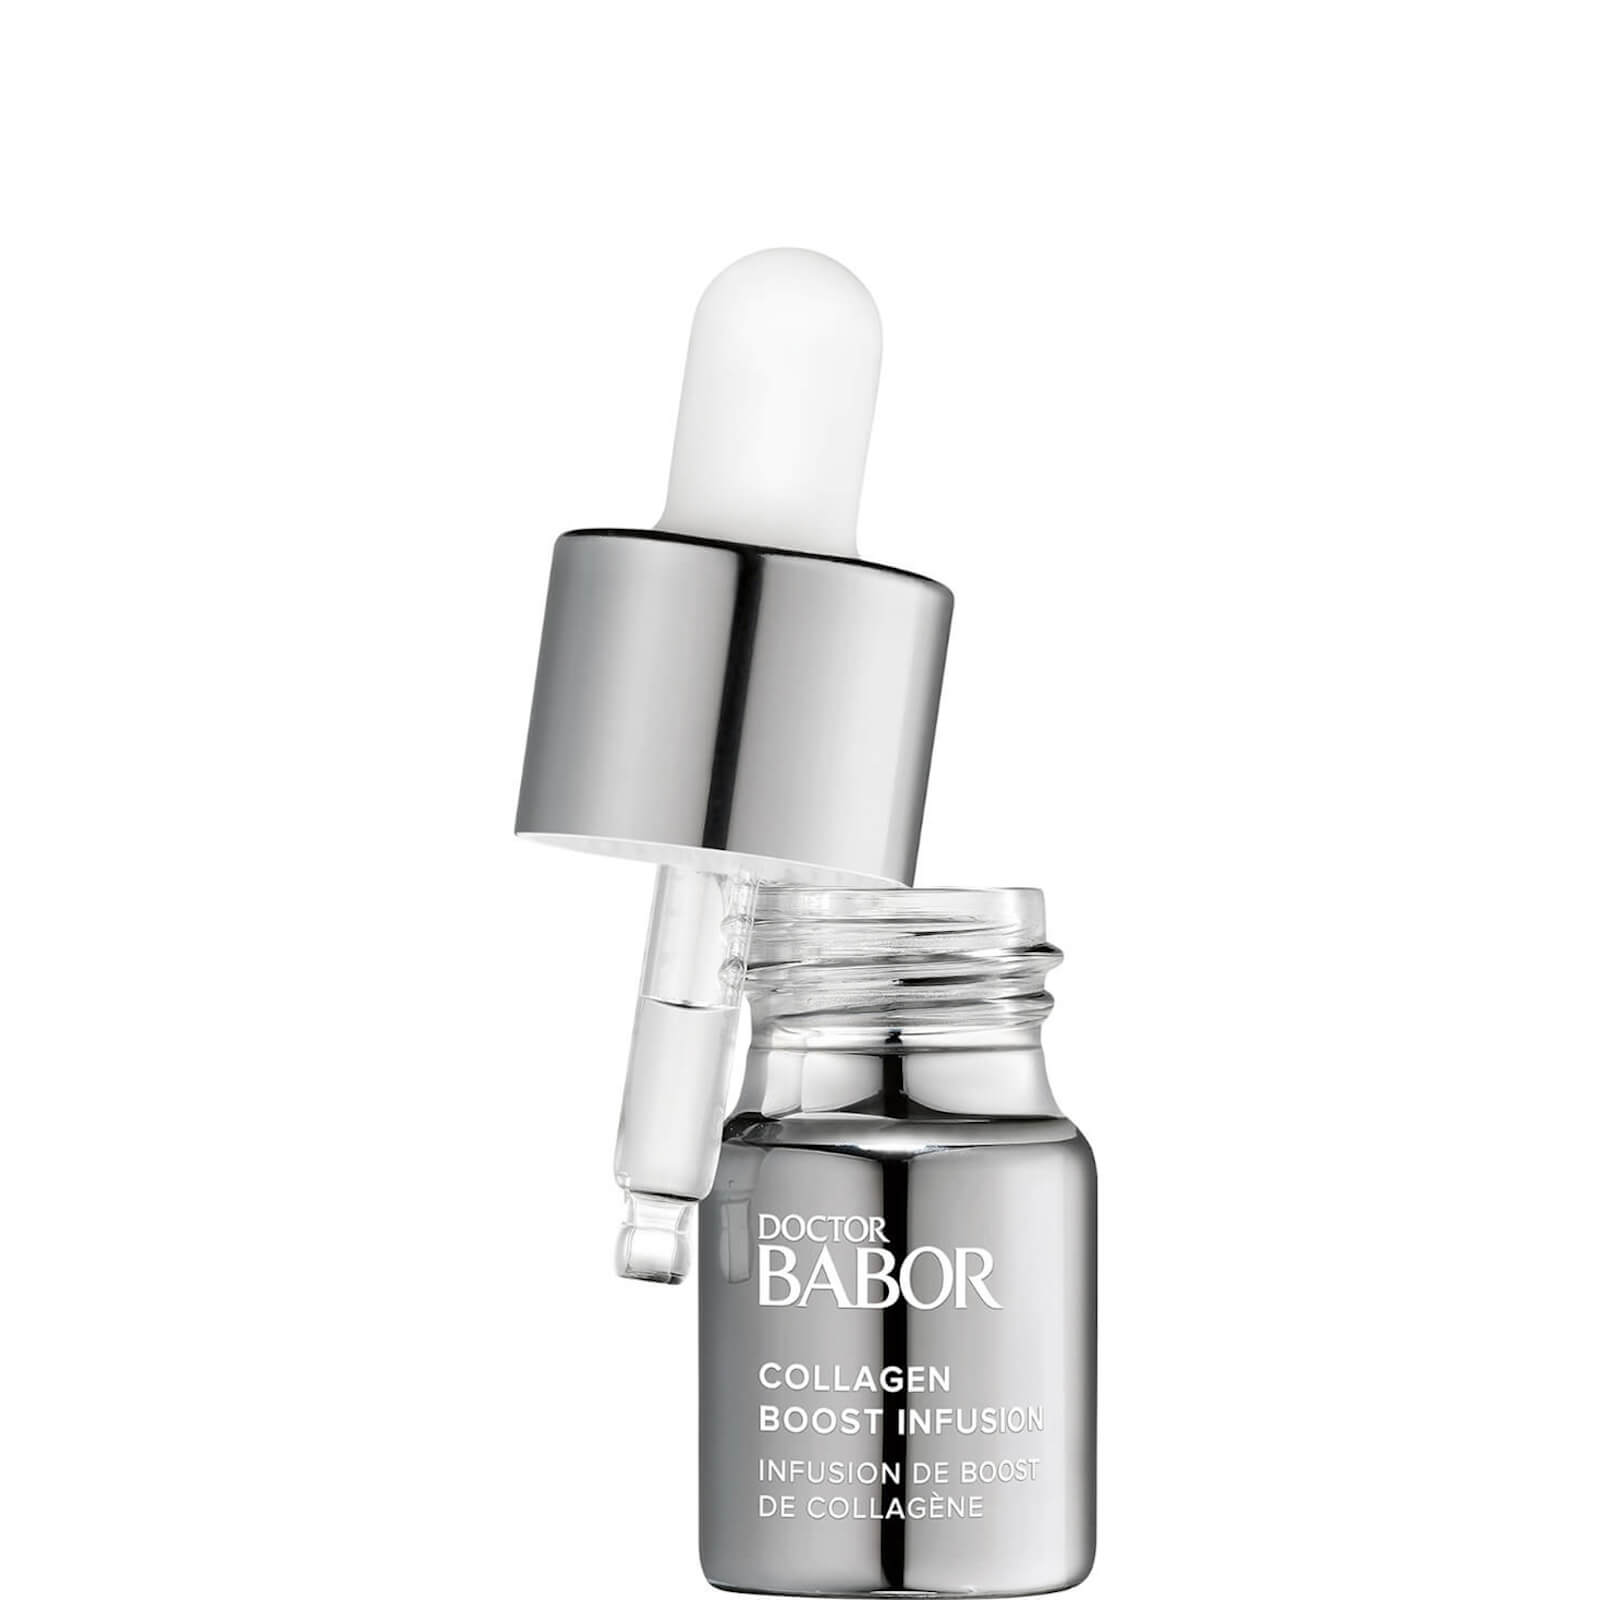 BABOR Doctor Lifting Cellular Collagen Boost Infusion 4 x 7ml